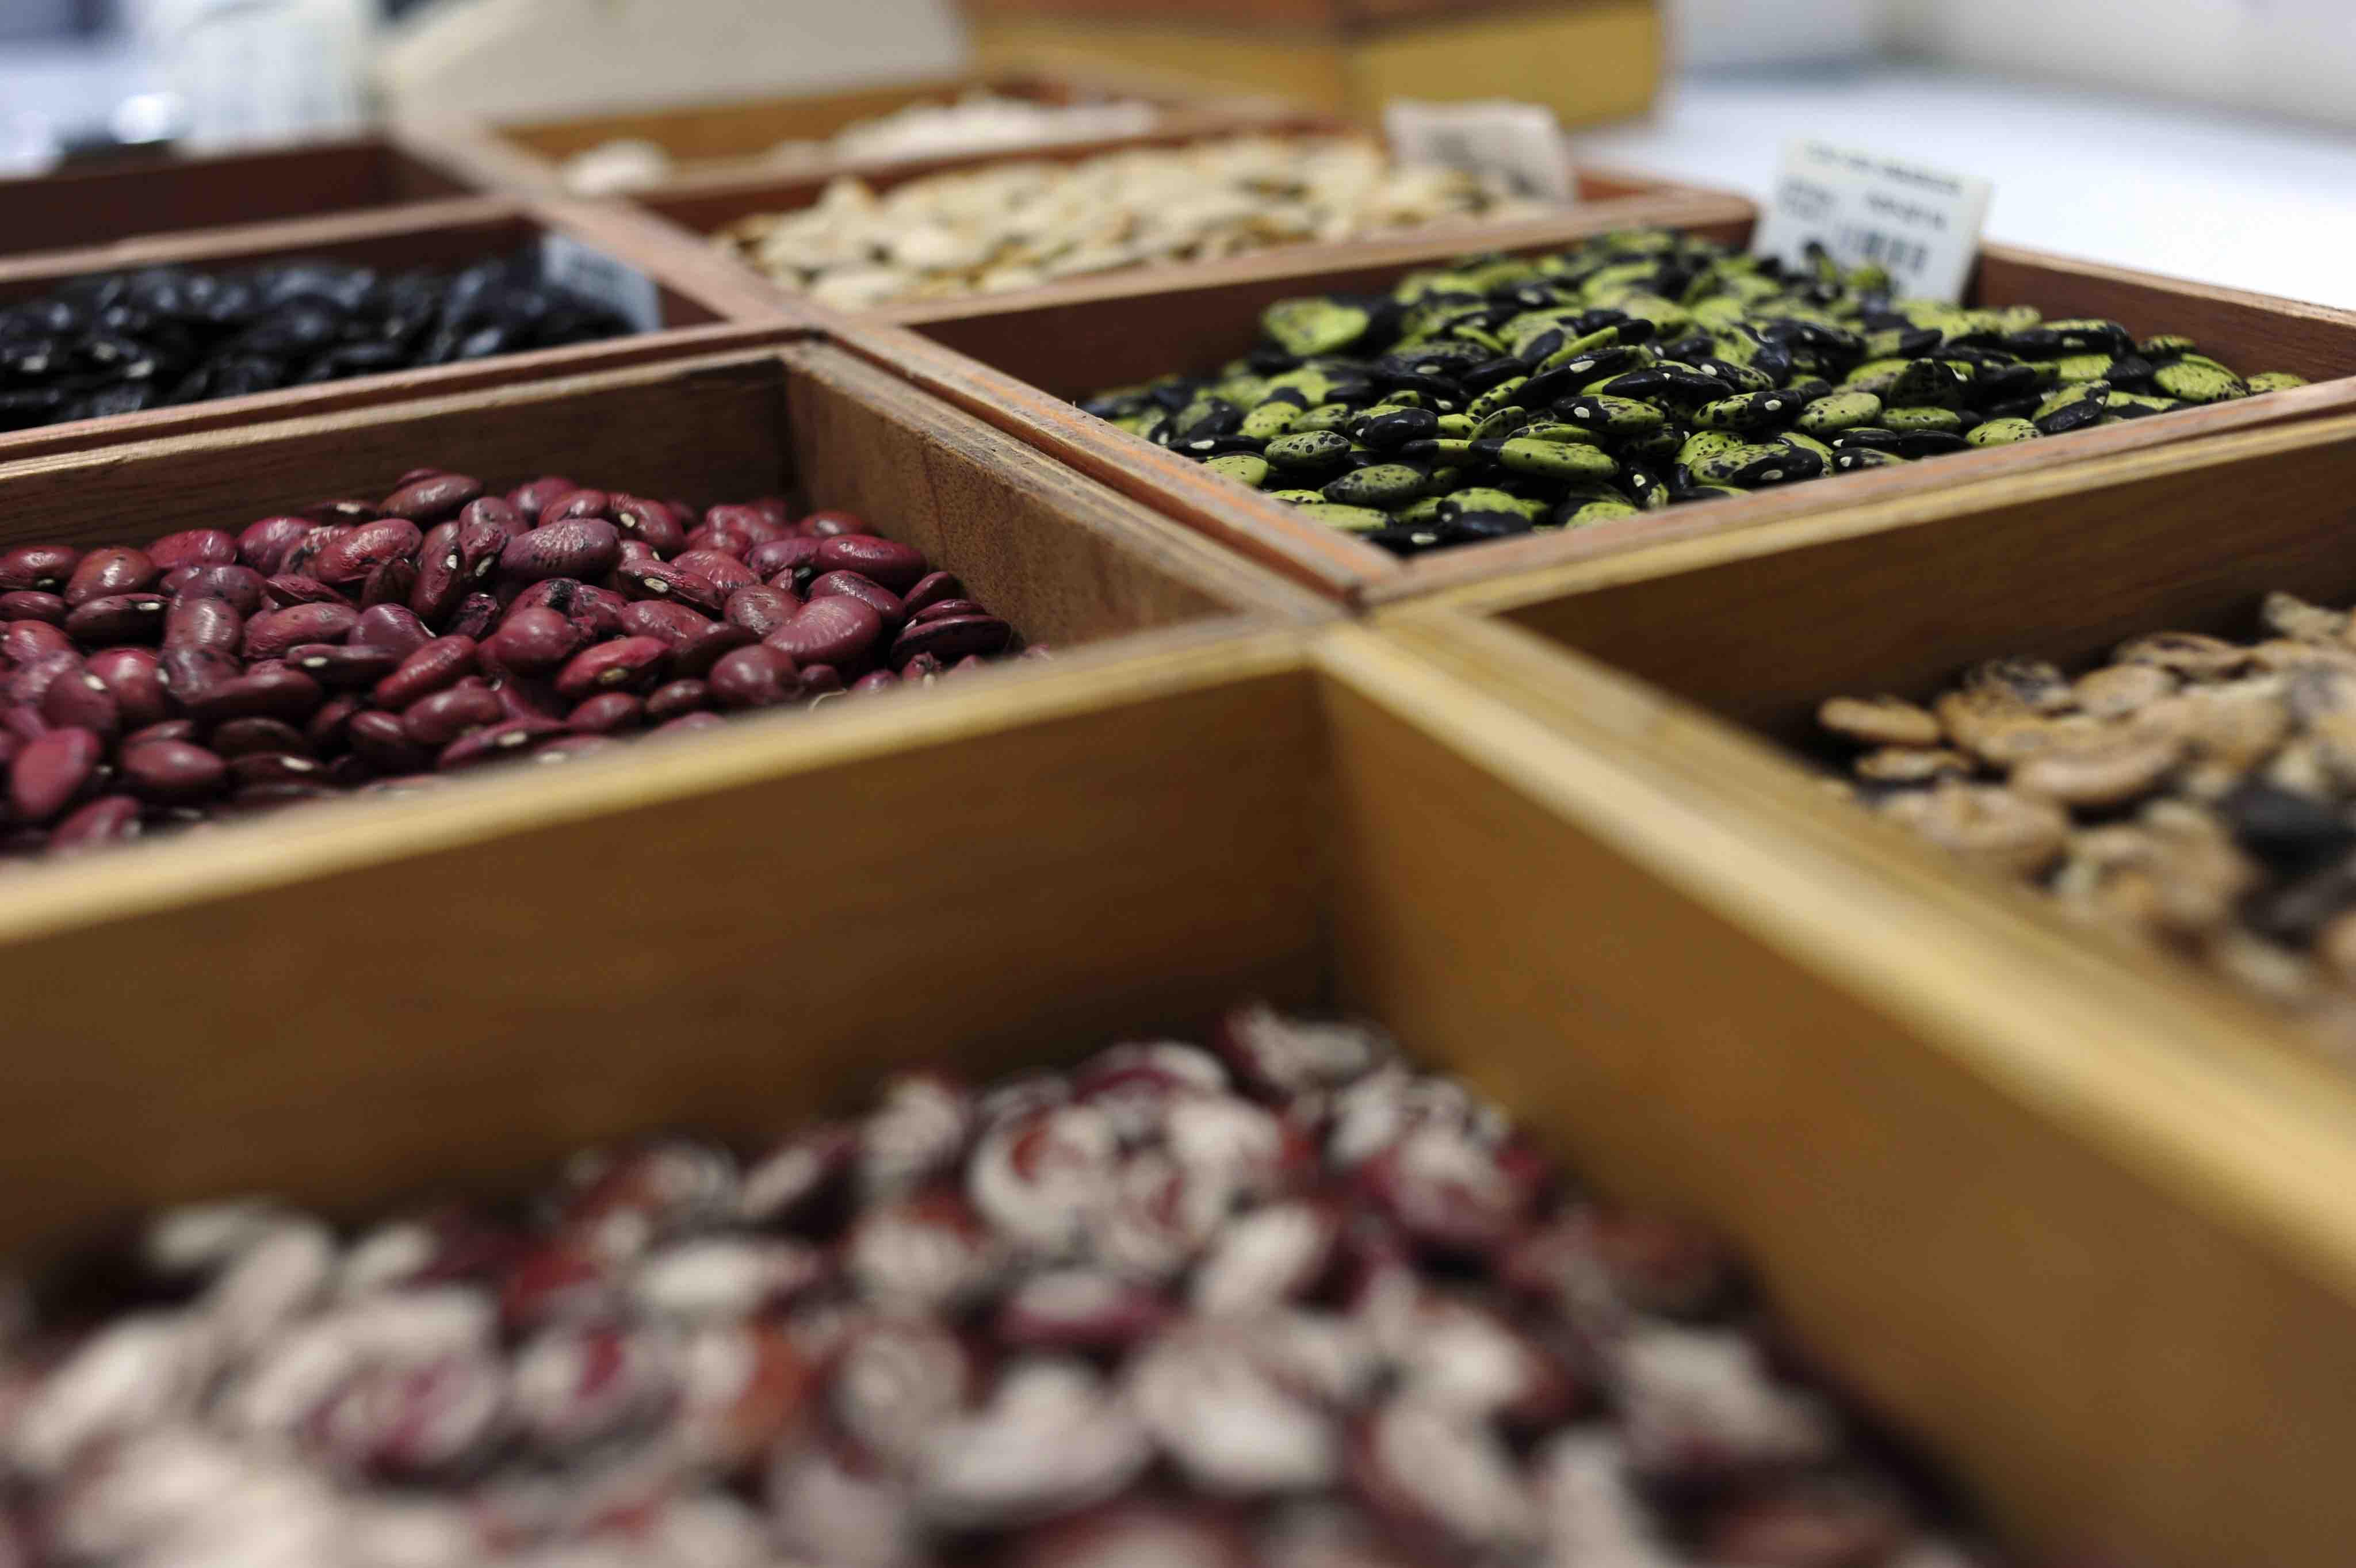 A picture of seeds in a tray